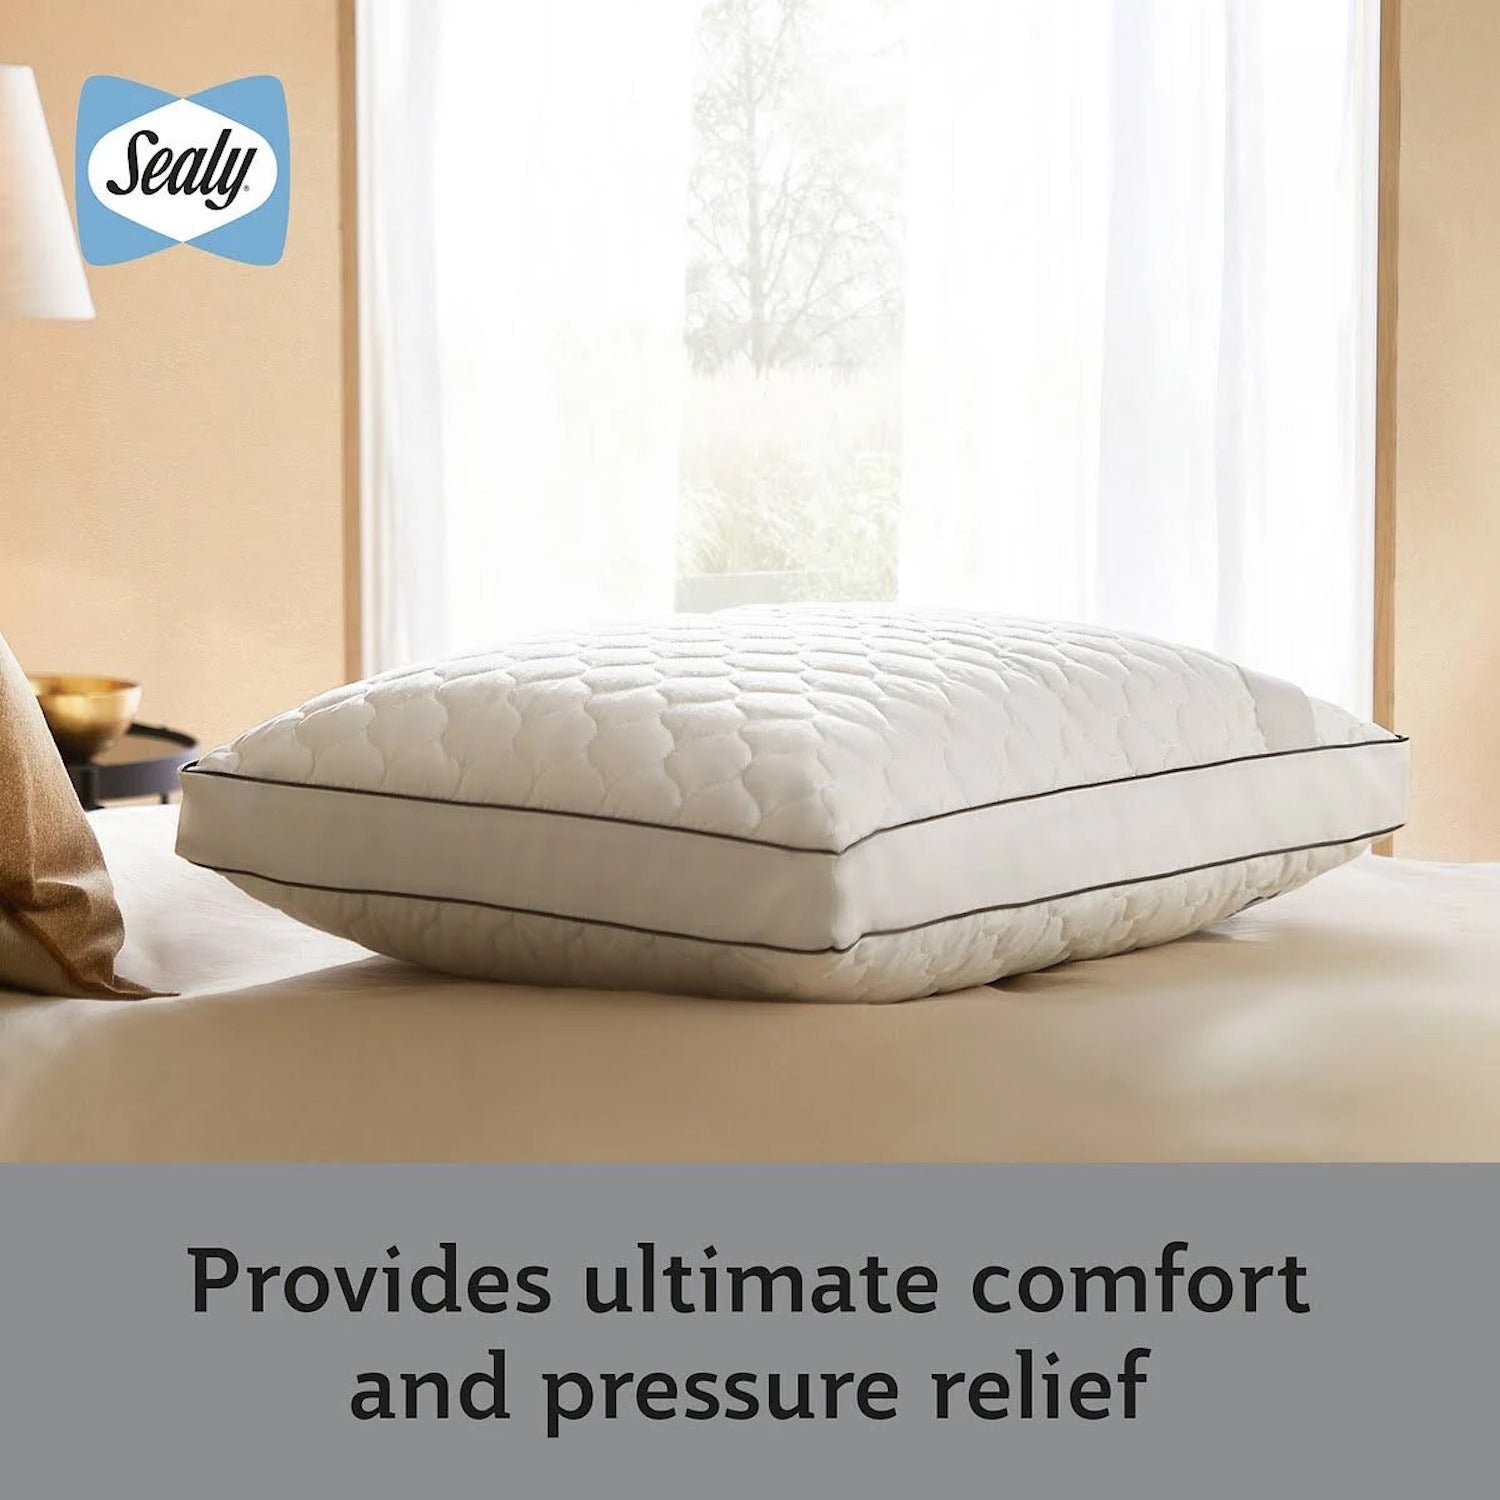 The Sealy Side Sleeper pillow provides ultimate comfort and pressure relief